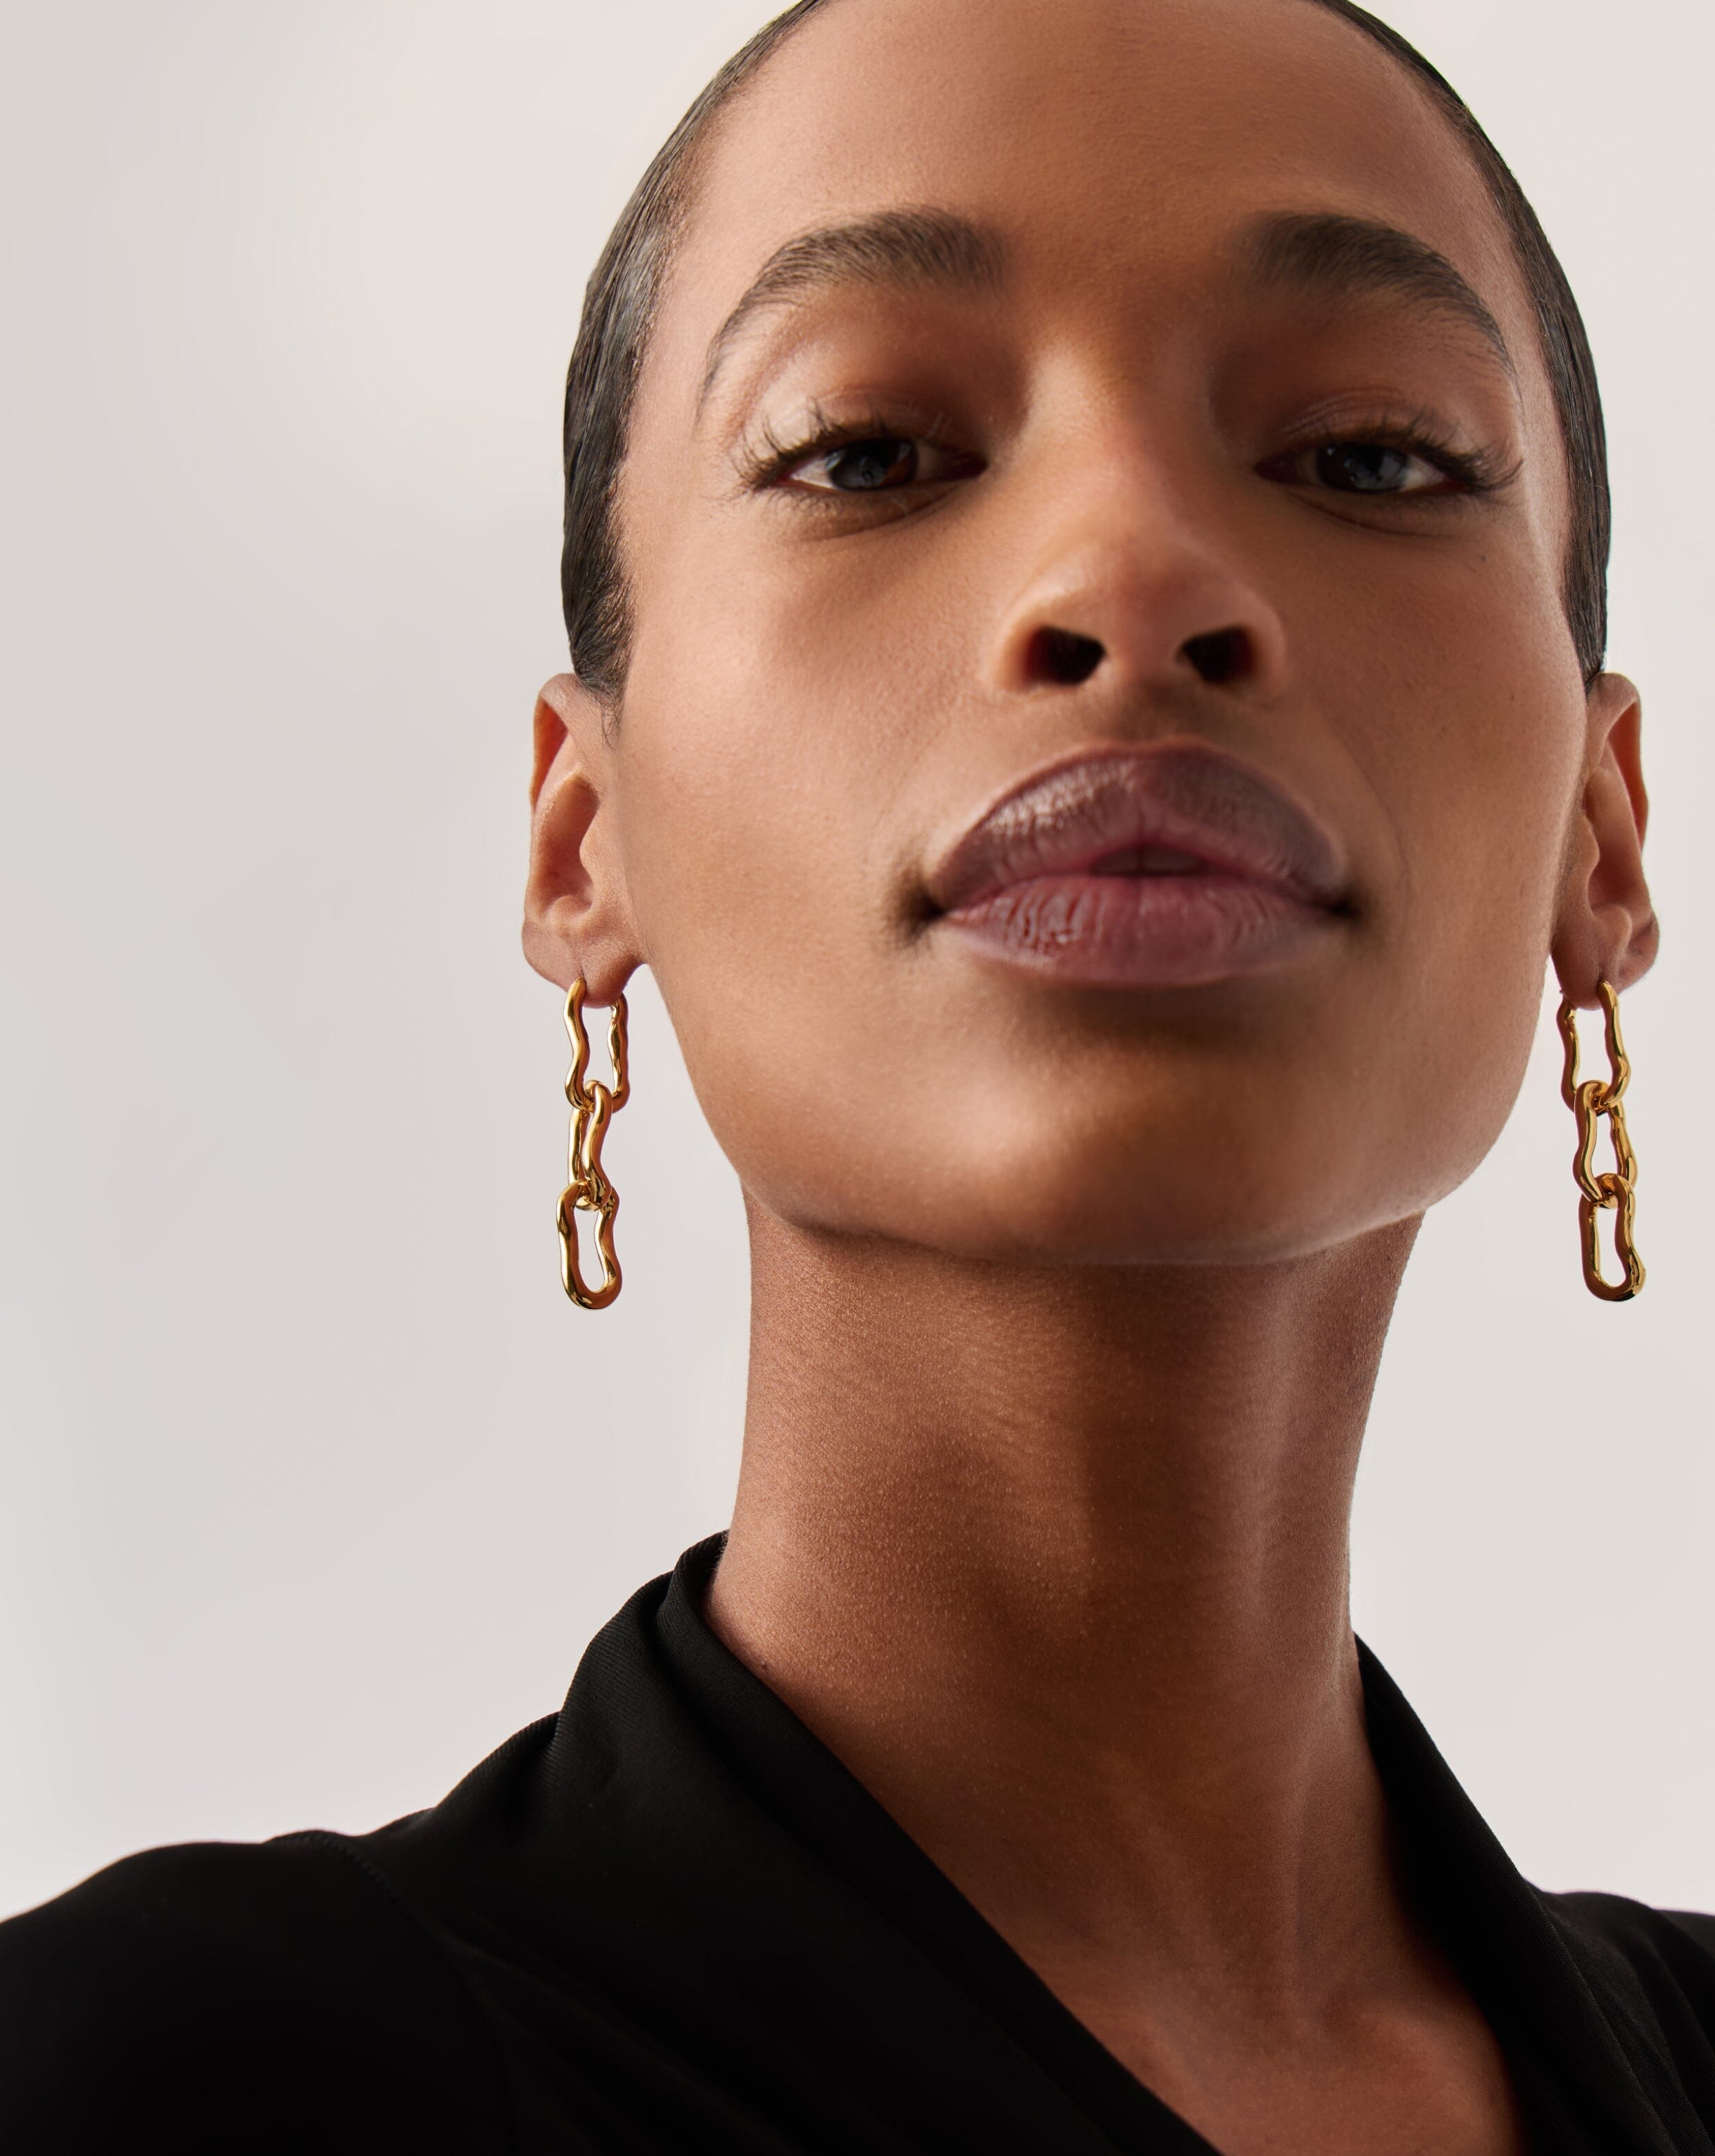 Molten Ovate Triple Drop Earrings | 18ct Recycled Gold Plating on Brass Earrings Missoma 